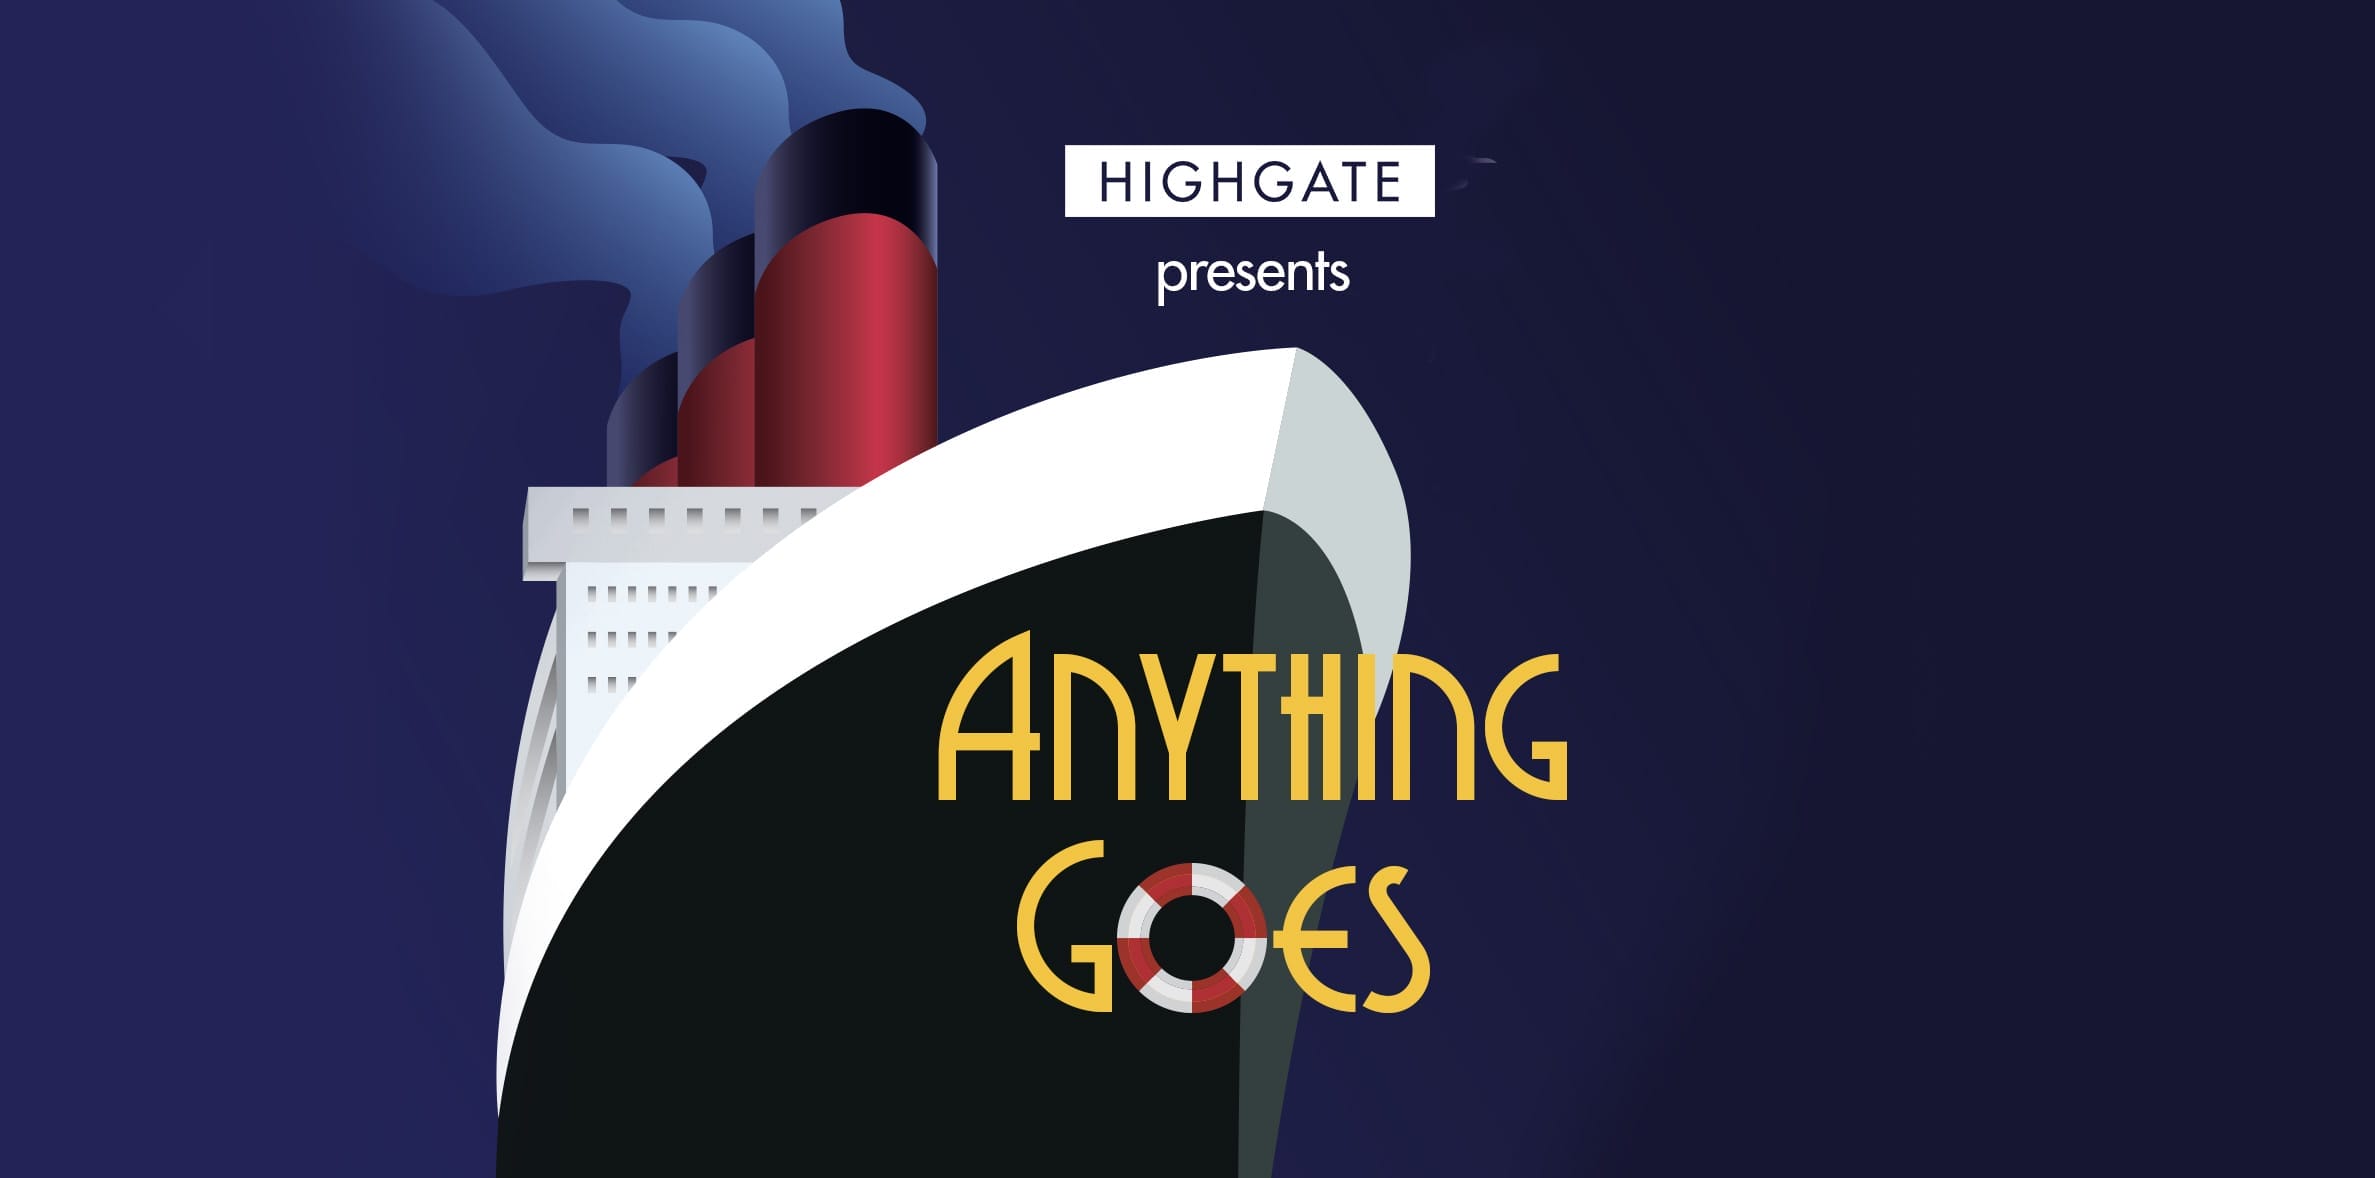 A nautical cartoon style poster featuring artwork for Anything Goes. The artwork features a large ship against a navy background, with yellow text for the show title.